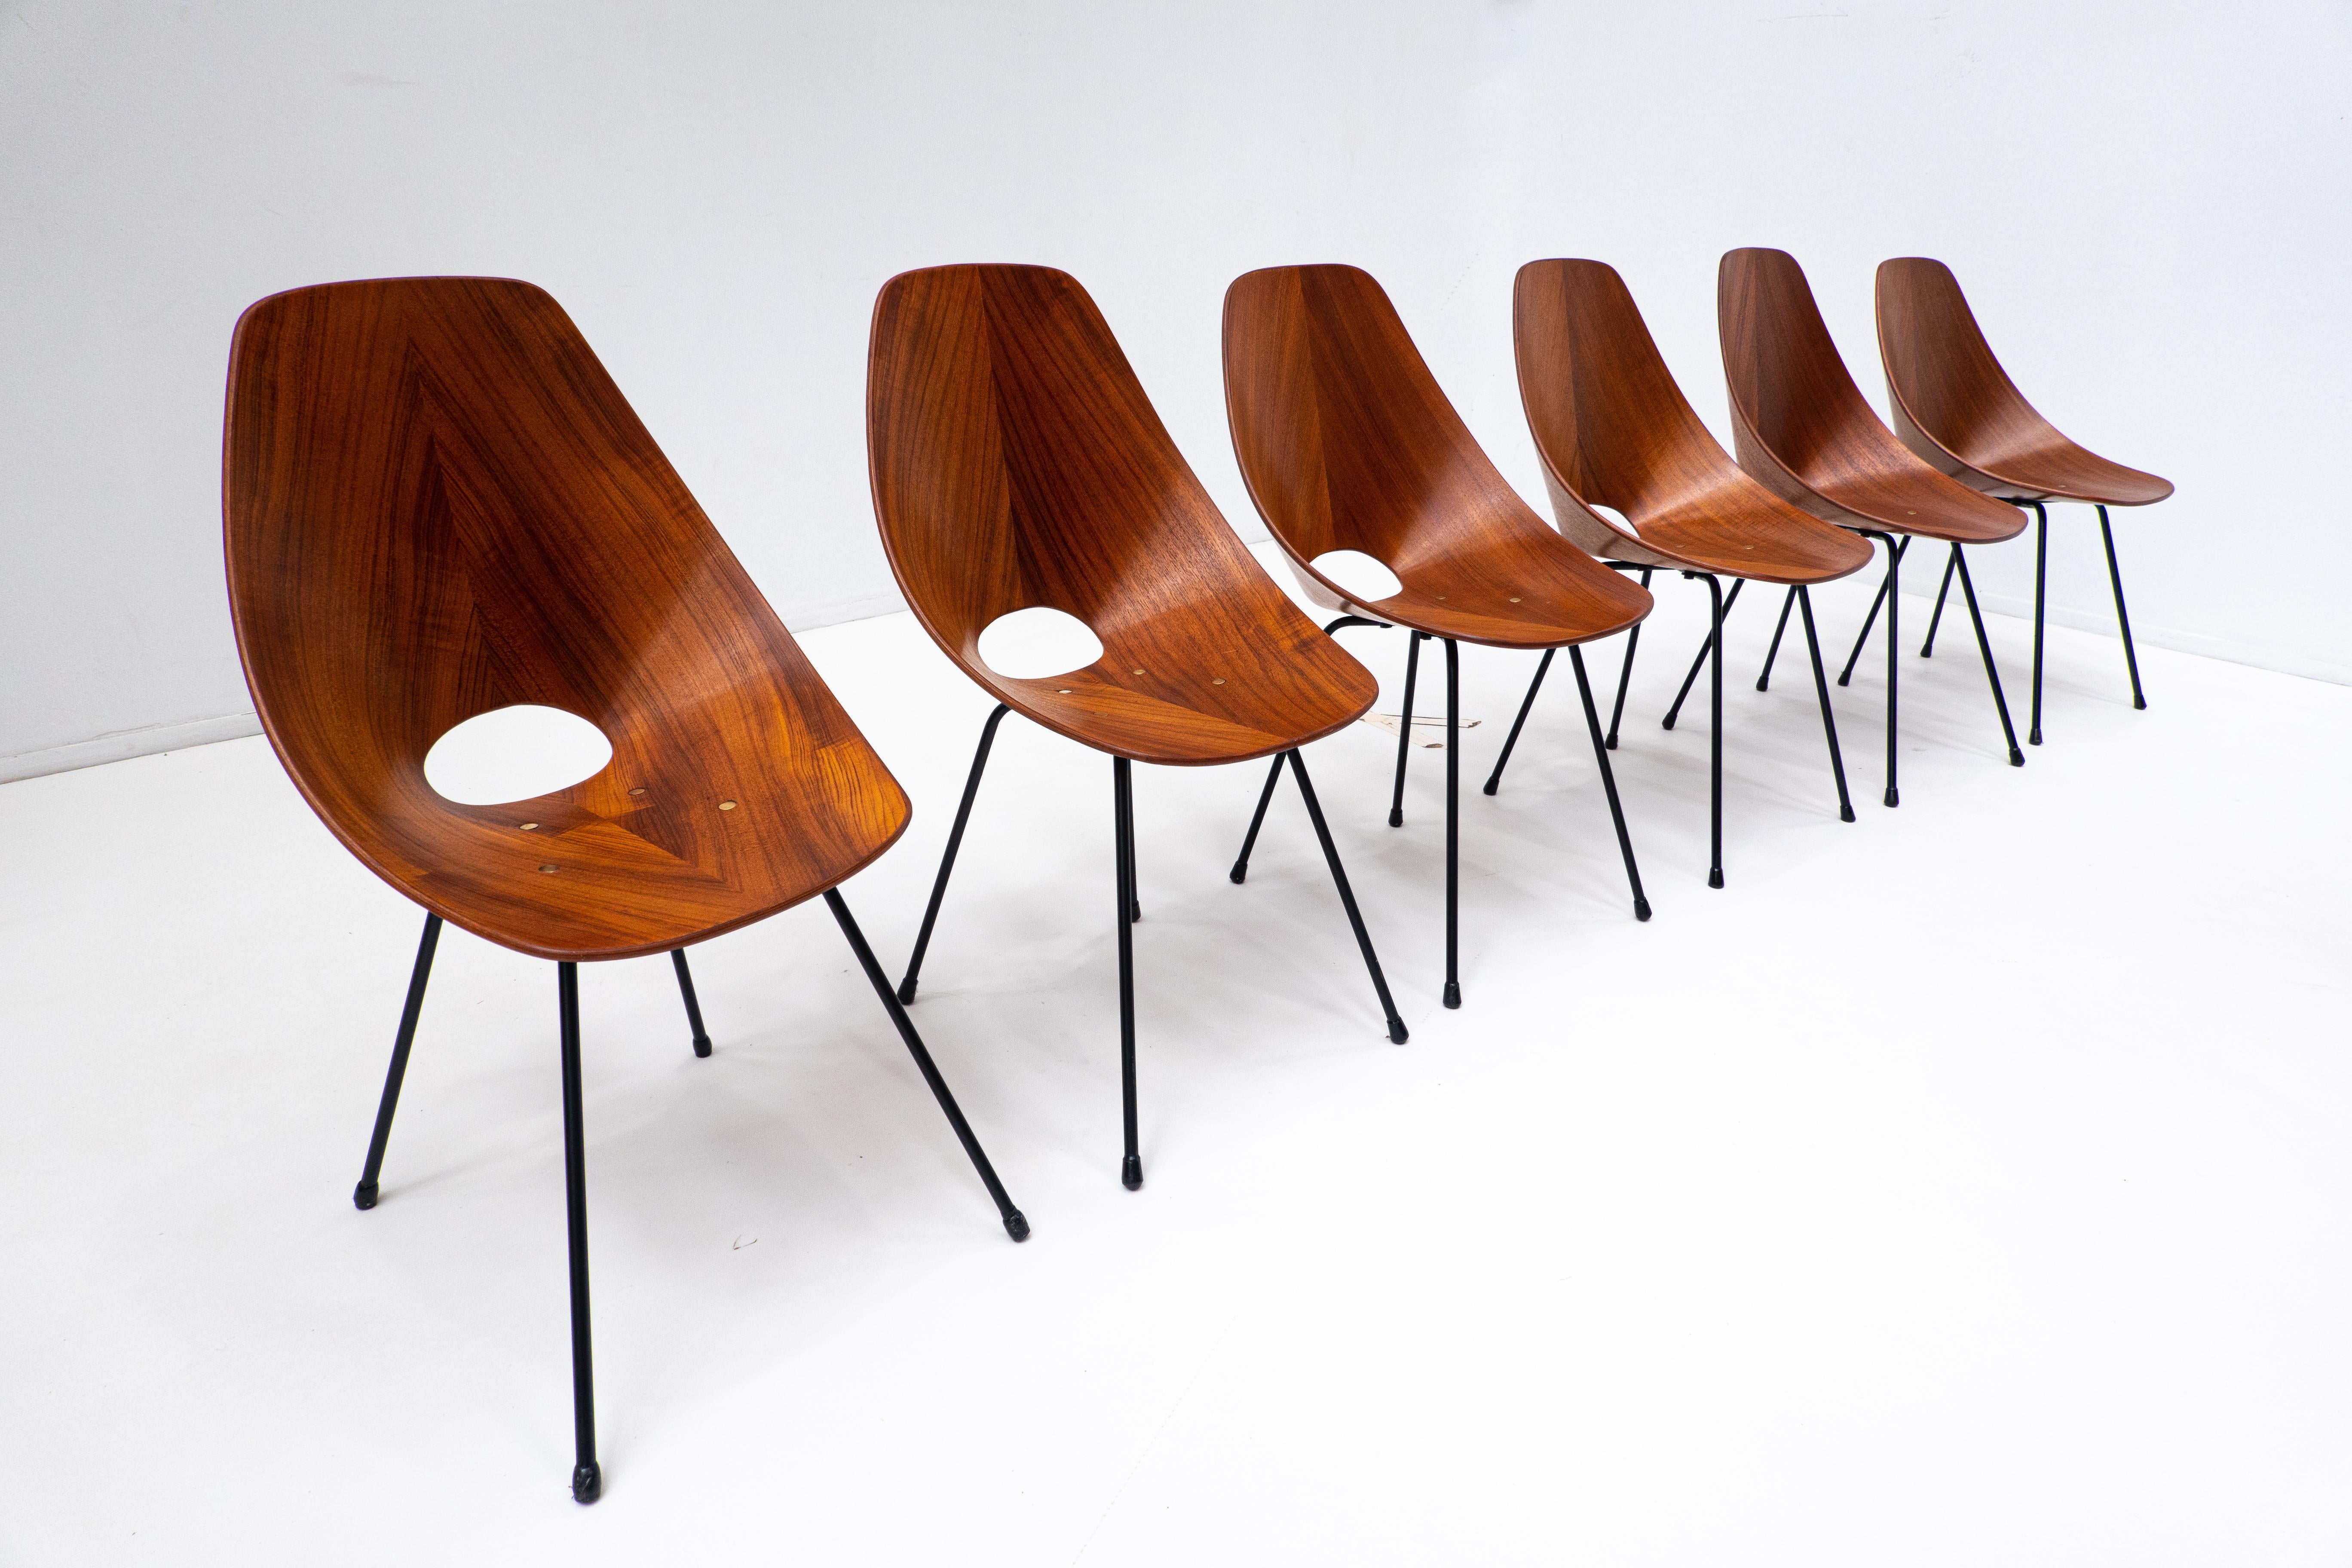 Set of 6 Mid-Century Chairs by Vittorio Nobili for Fratelli Tagliabue, Italy 1